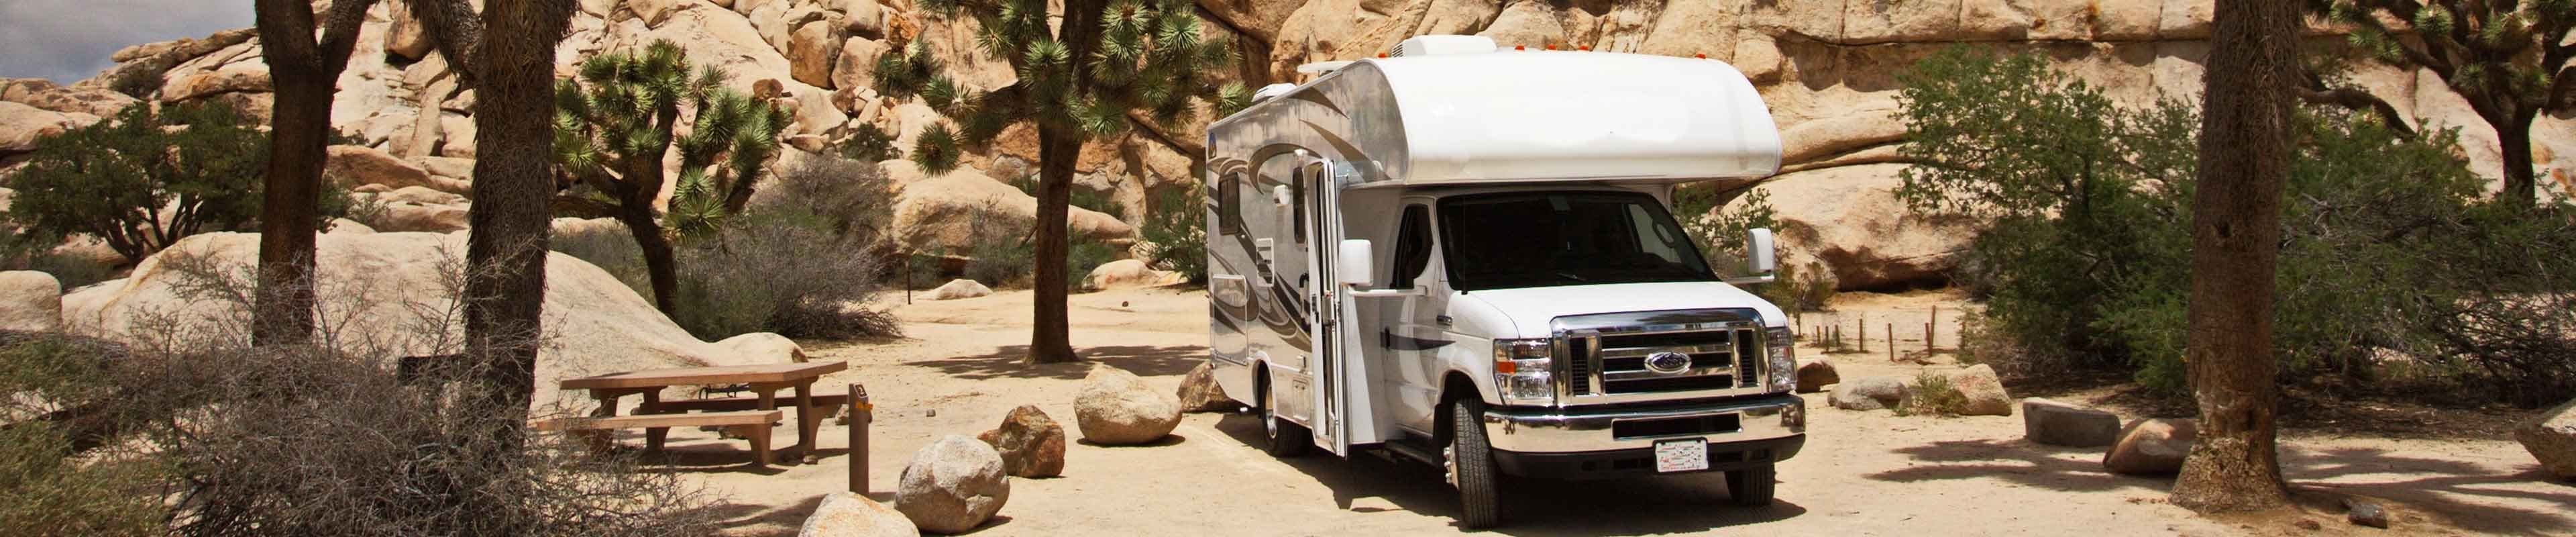 White, small recreational vehicle parked facing the camera at a desert campground in the Southwestern United States